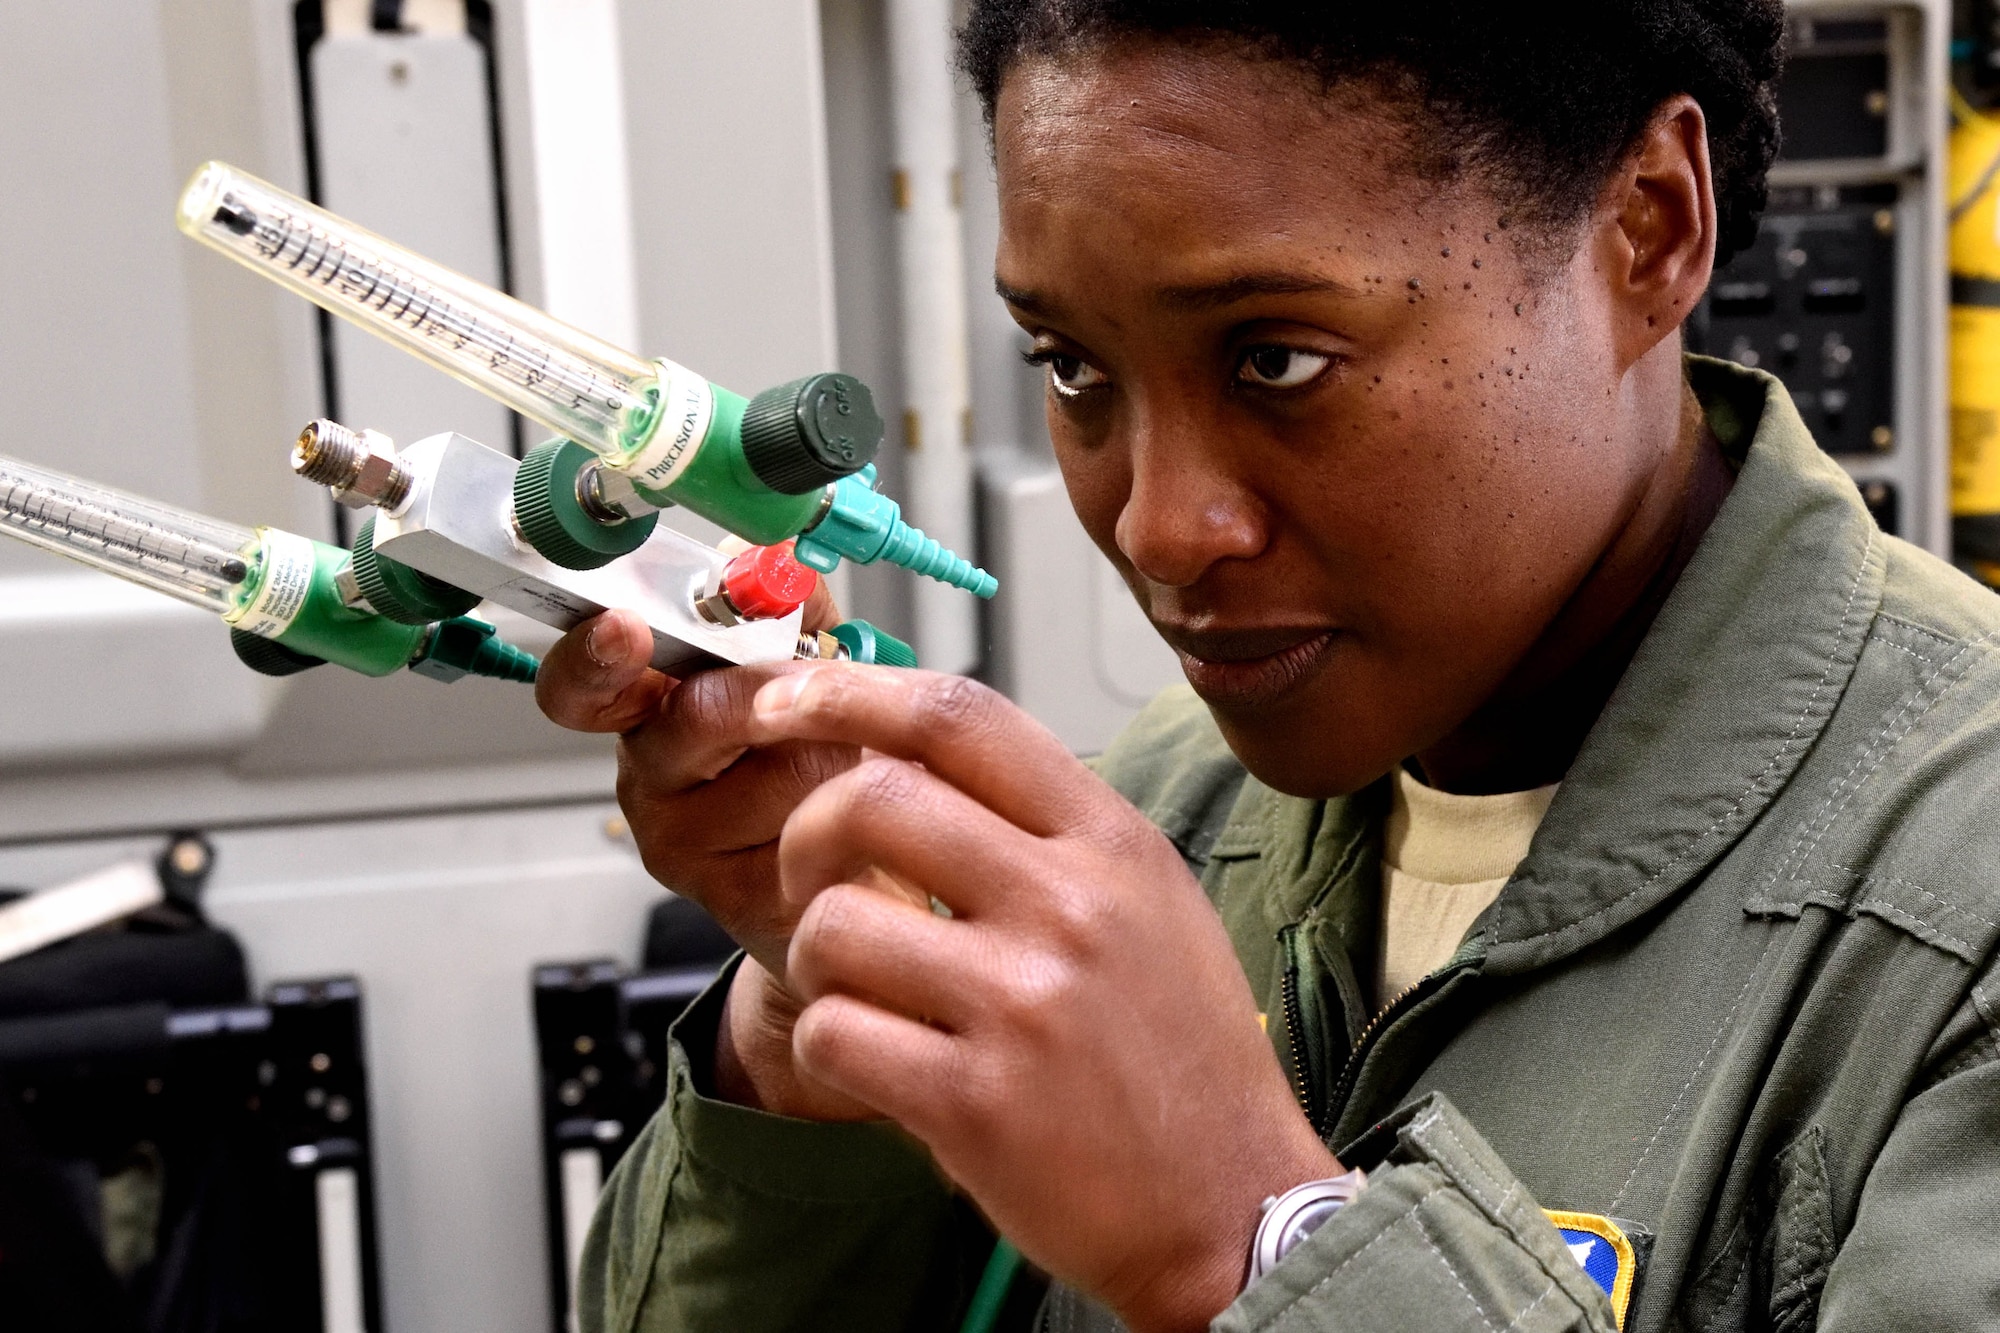 Master Sgt. Kimelyn Hall, 36th Aeromedical Evacuation Squadron aeromedical evacuation technician, inspects a minilator and flowmeter of a portable therapeutic liquid oxygen tank on a C-17 Globemaster III aircraft in preparation for receiving simulated patients during Southern Strike 2018 at the Gulfport Combat Readiness Training Center, Mississippi, Oct. 30, 2017. Southern Strike 2018 is a large-scale, joint multinational combat exercise that provides tactical level training for the full spectrum of conflict and emphasizes air dominance, maritime operations, maritime air support, precision engagement, close air support, command and control, personnel recovery, aeromedical evacuation, and combat medical support. (U.S. Air Force photo by Tech. Sgt. Ryan Labadens)